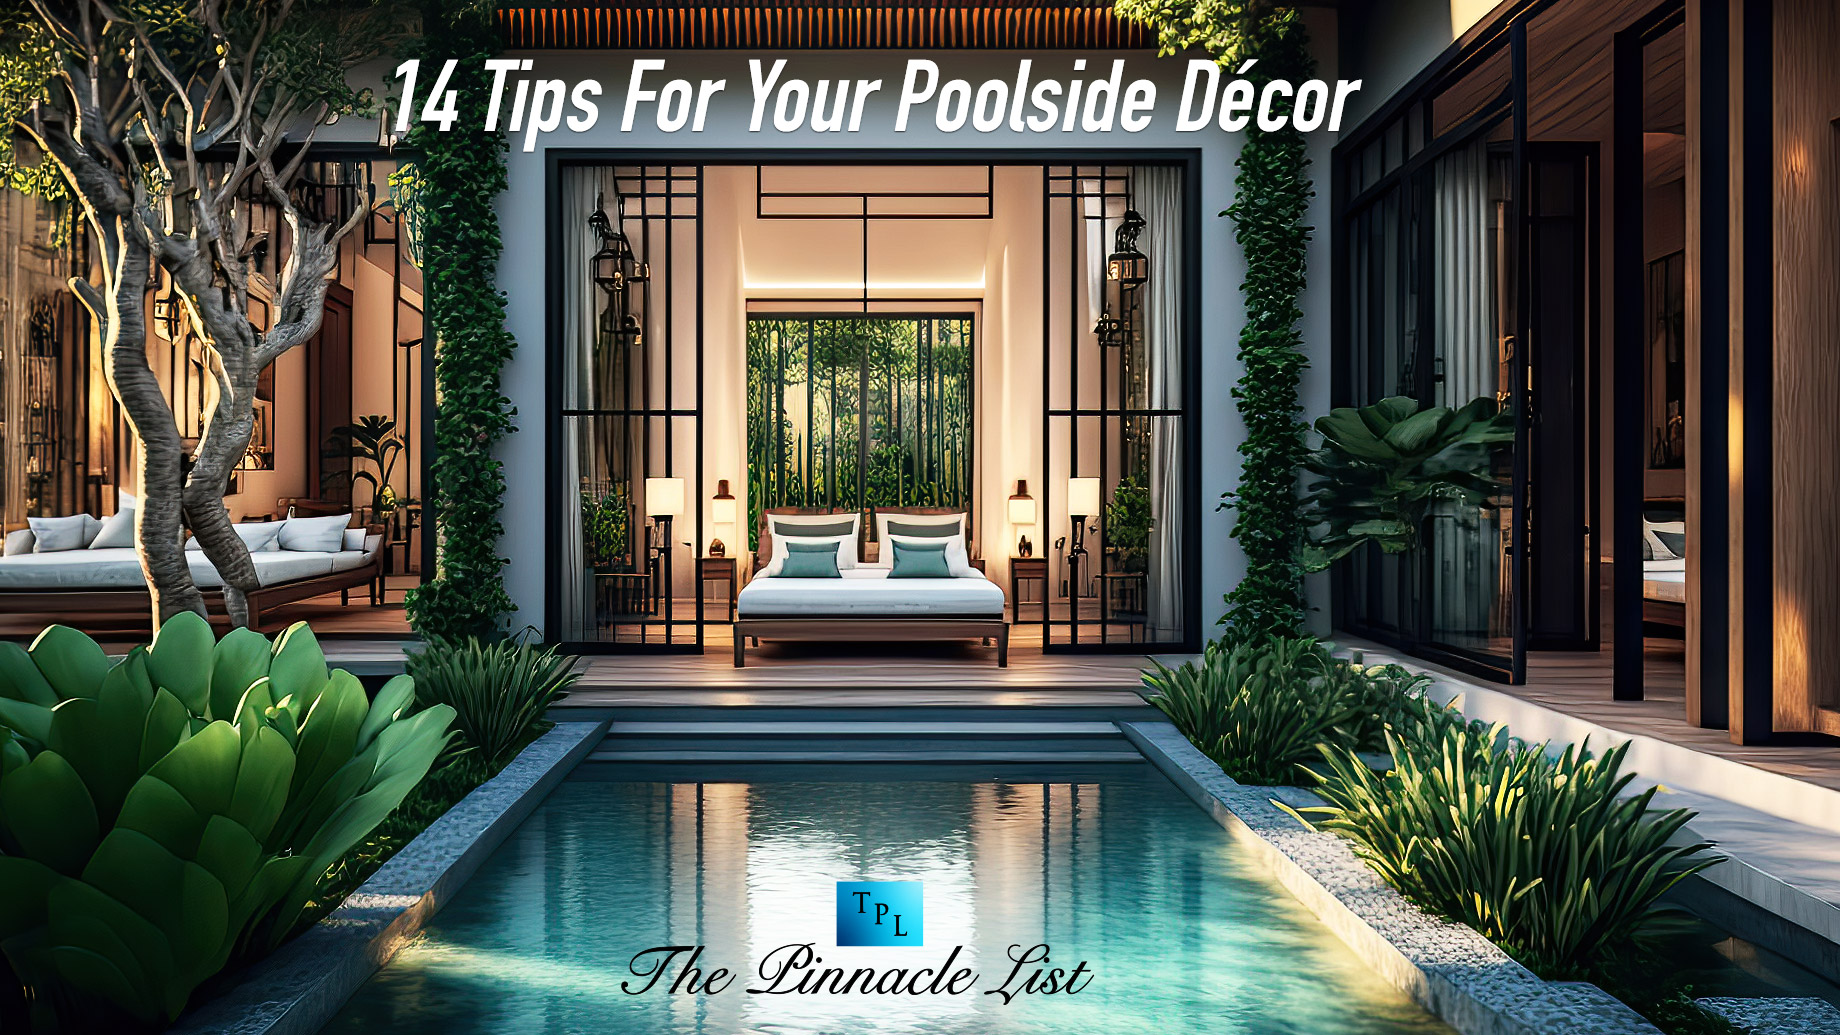 14 Tips For Your Poolside Décor